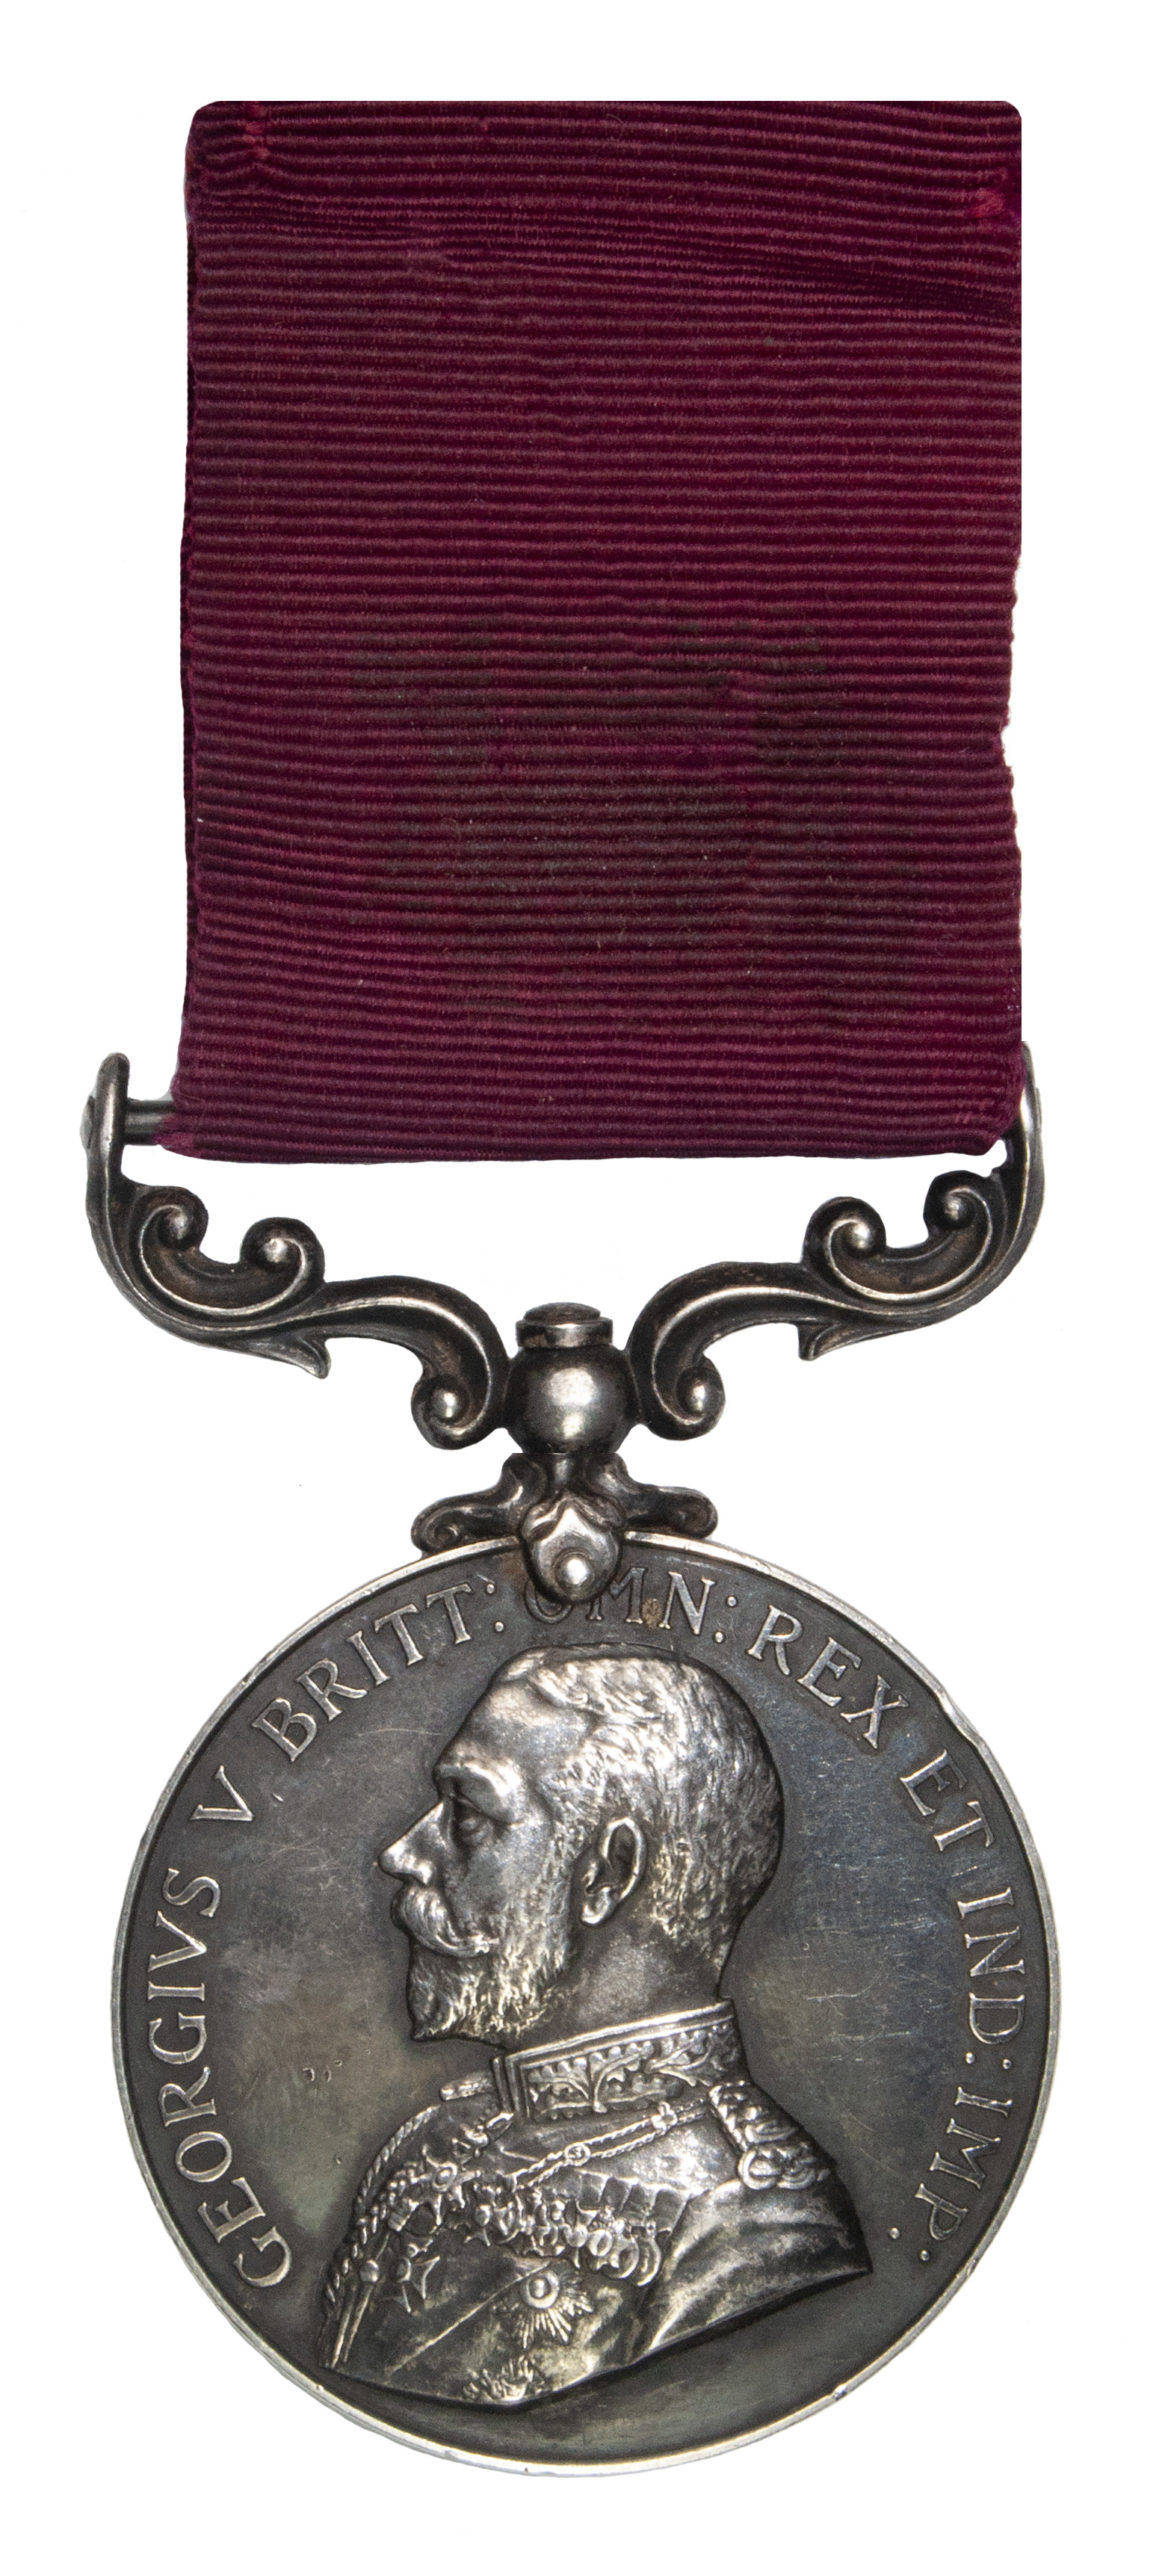 LS & GC Medal to 2nd Lt. W. Francis, Royal Fusiliers